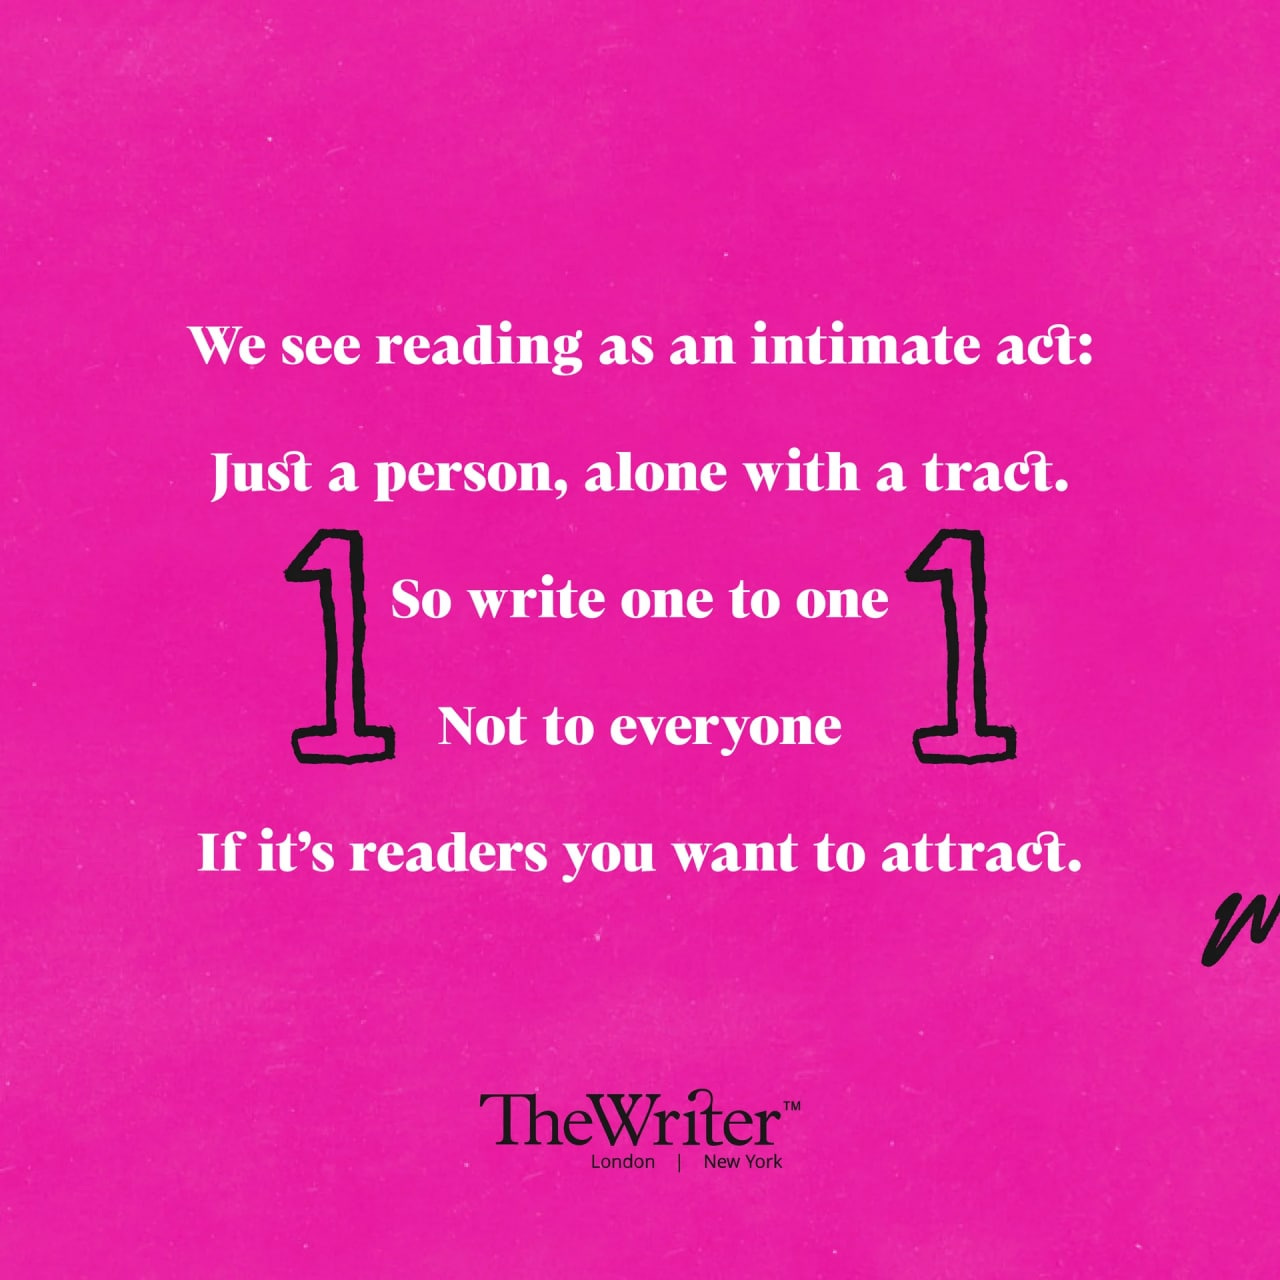 We see reading as an intimate act: Just a person, alone with a tract. So write one to one Not to everyone If it’s readers you want to attract.